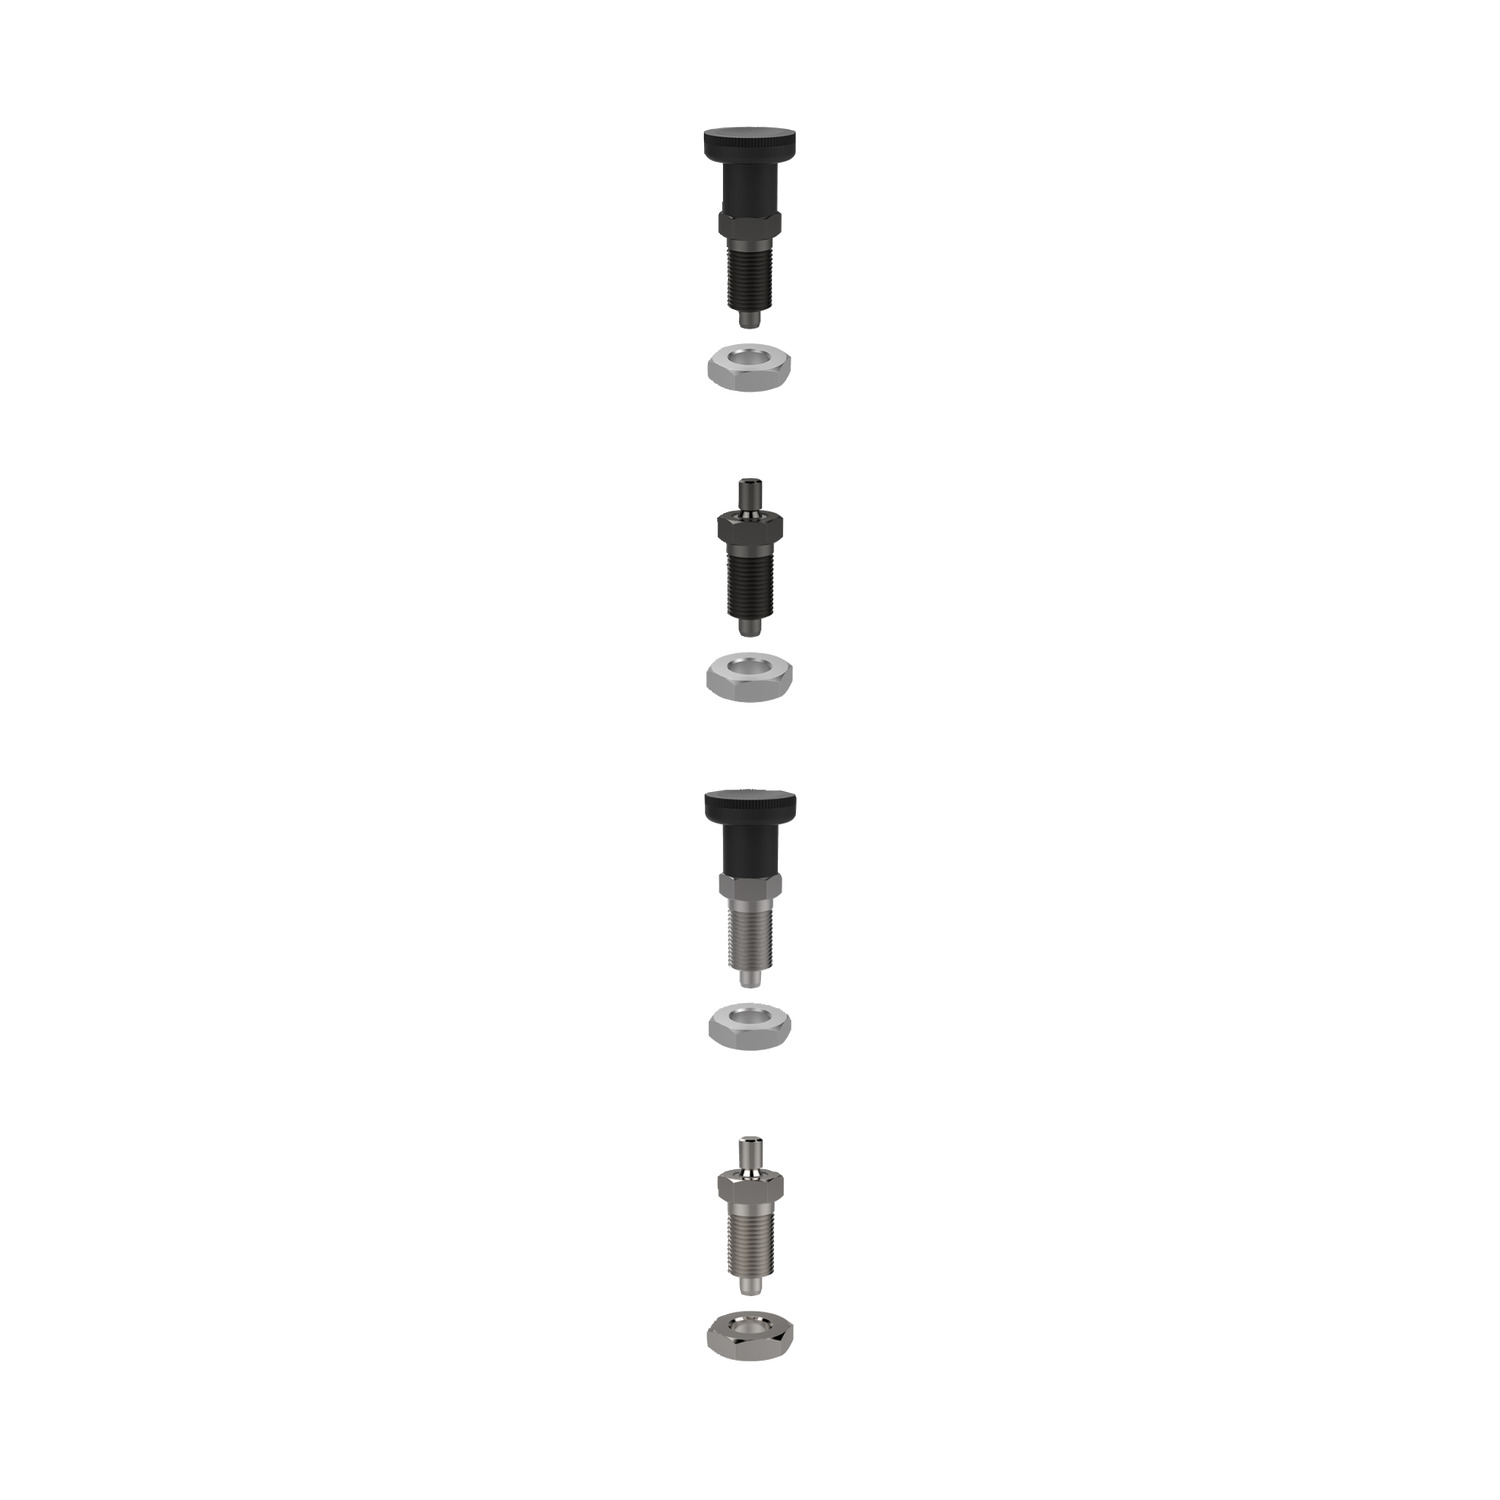 Index Plungers - Pull Grip This range hosts an index plunger without a fitted grip which allows the user to mount a customised handle to suit the application requirements.